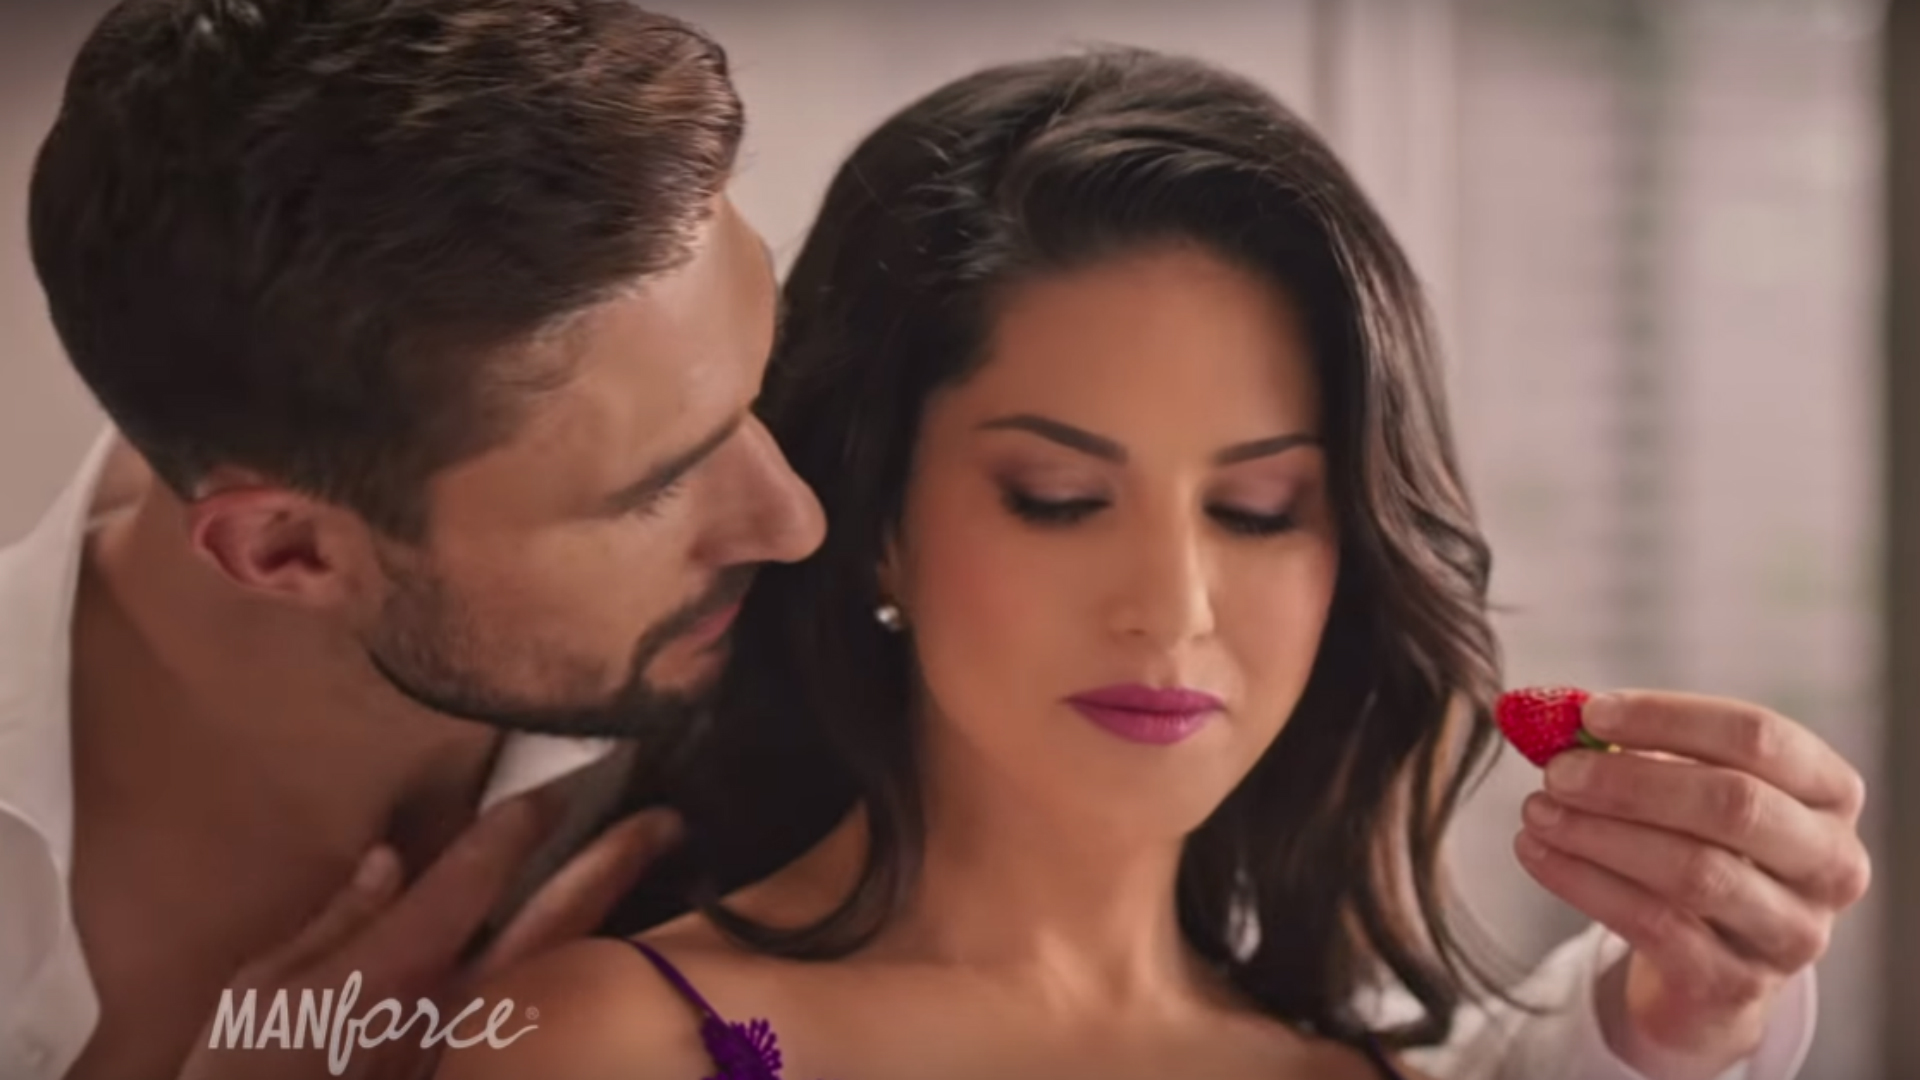 Sunny Leone X X X Sex Condom Videos - Sunny Leone Is XXXTremely Bold in New Manforce Condom Ad! Sexy ...